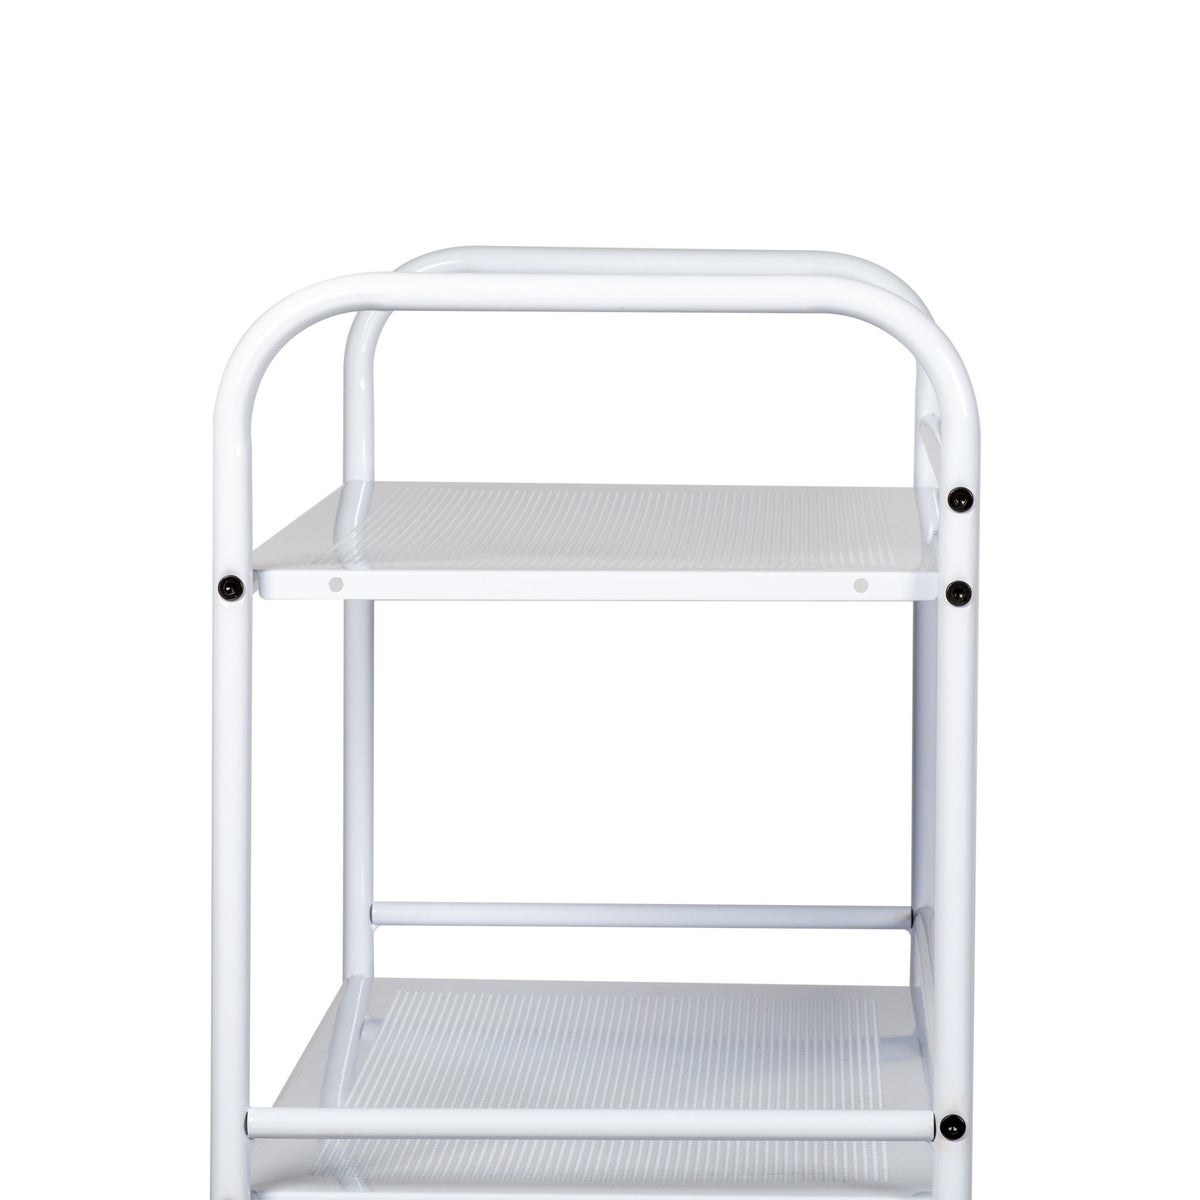 White/White - 4 Tier Rolling Cart (1)